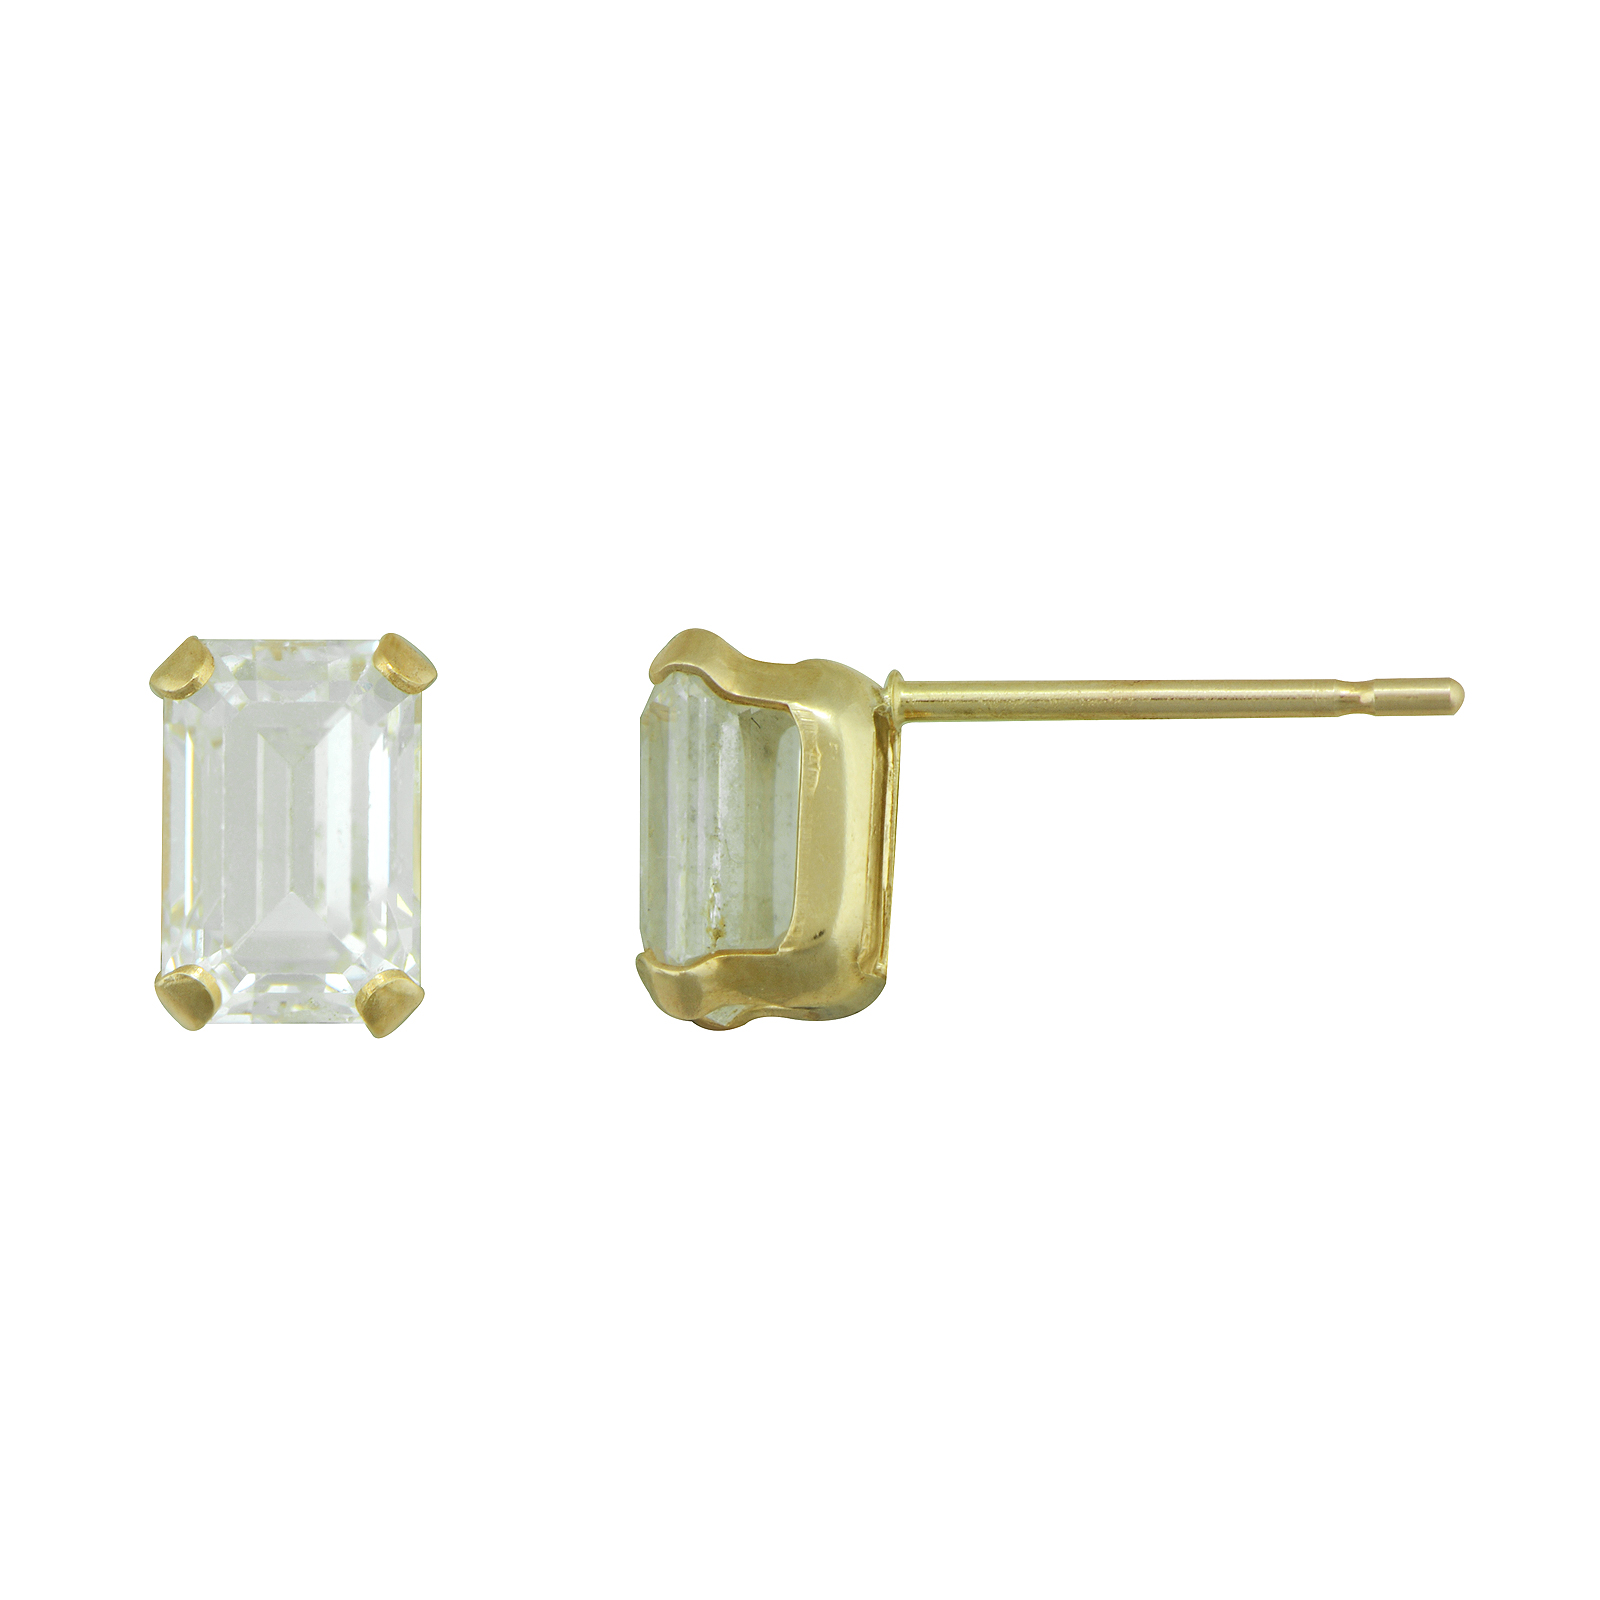 10KT Emerald Cut Cubic Zirconia Stud with Gold Filled Cluth Earrings